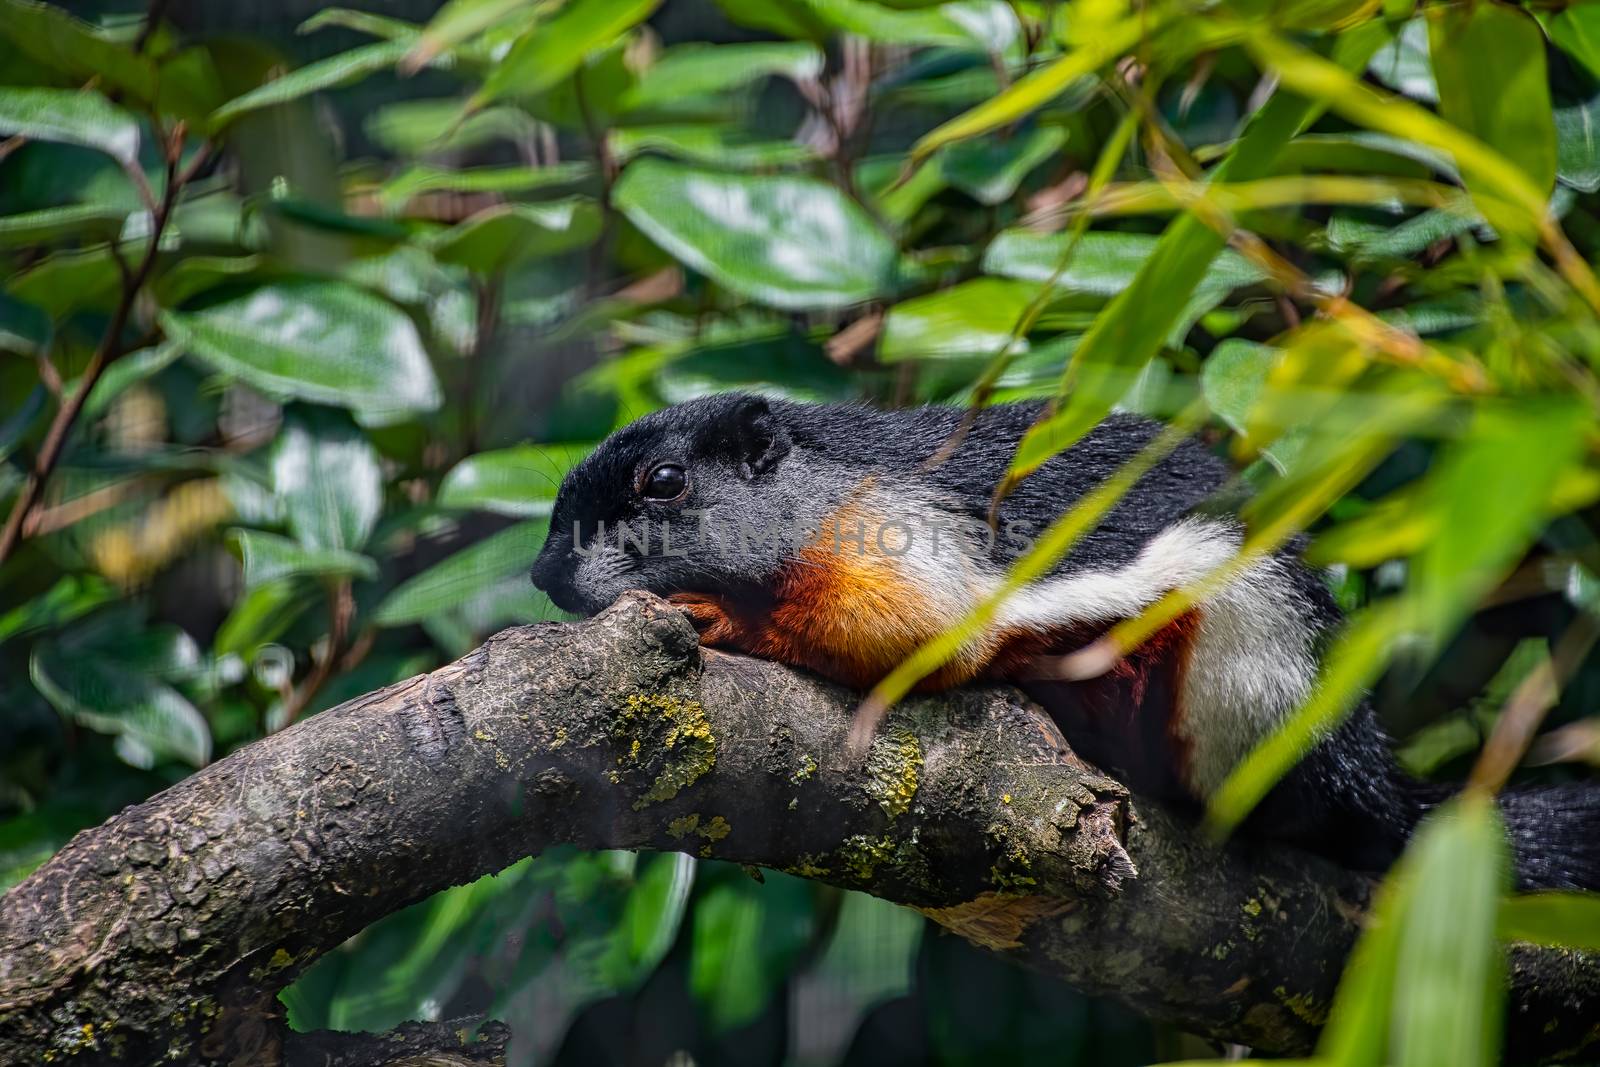 A Prevost squirrel laying on a tree branch